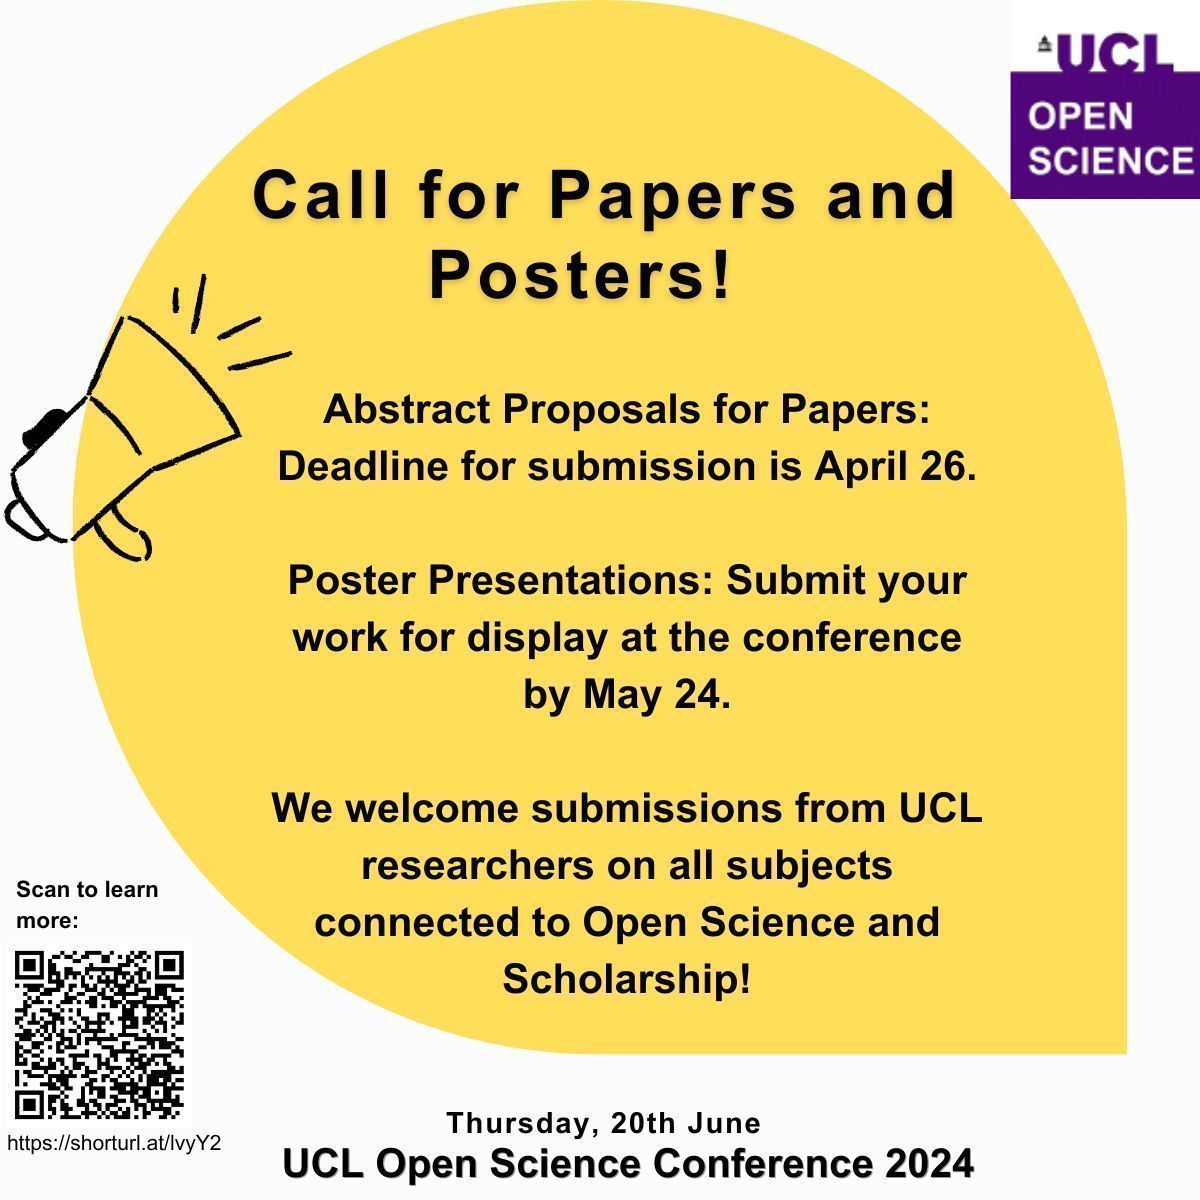 Join us at UCL Open Science Conference on June 20th! We're calling for papers & posters that highlight research at UCL championing Open Science & Scholarship principles. Submit abstracts by April 26 & poster proposals by May 24. More info: buff.ly/4arz7xa